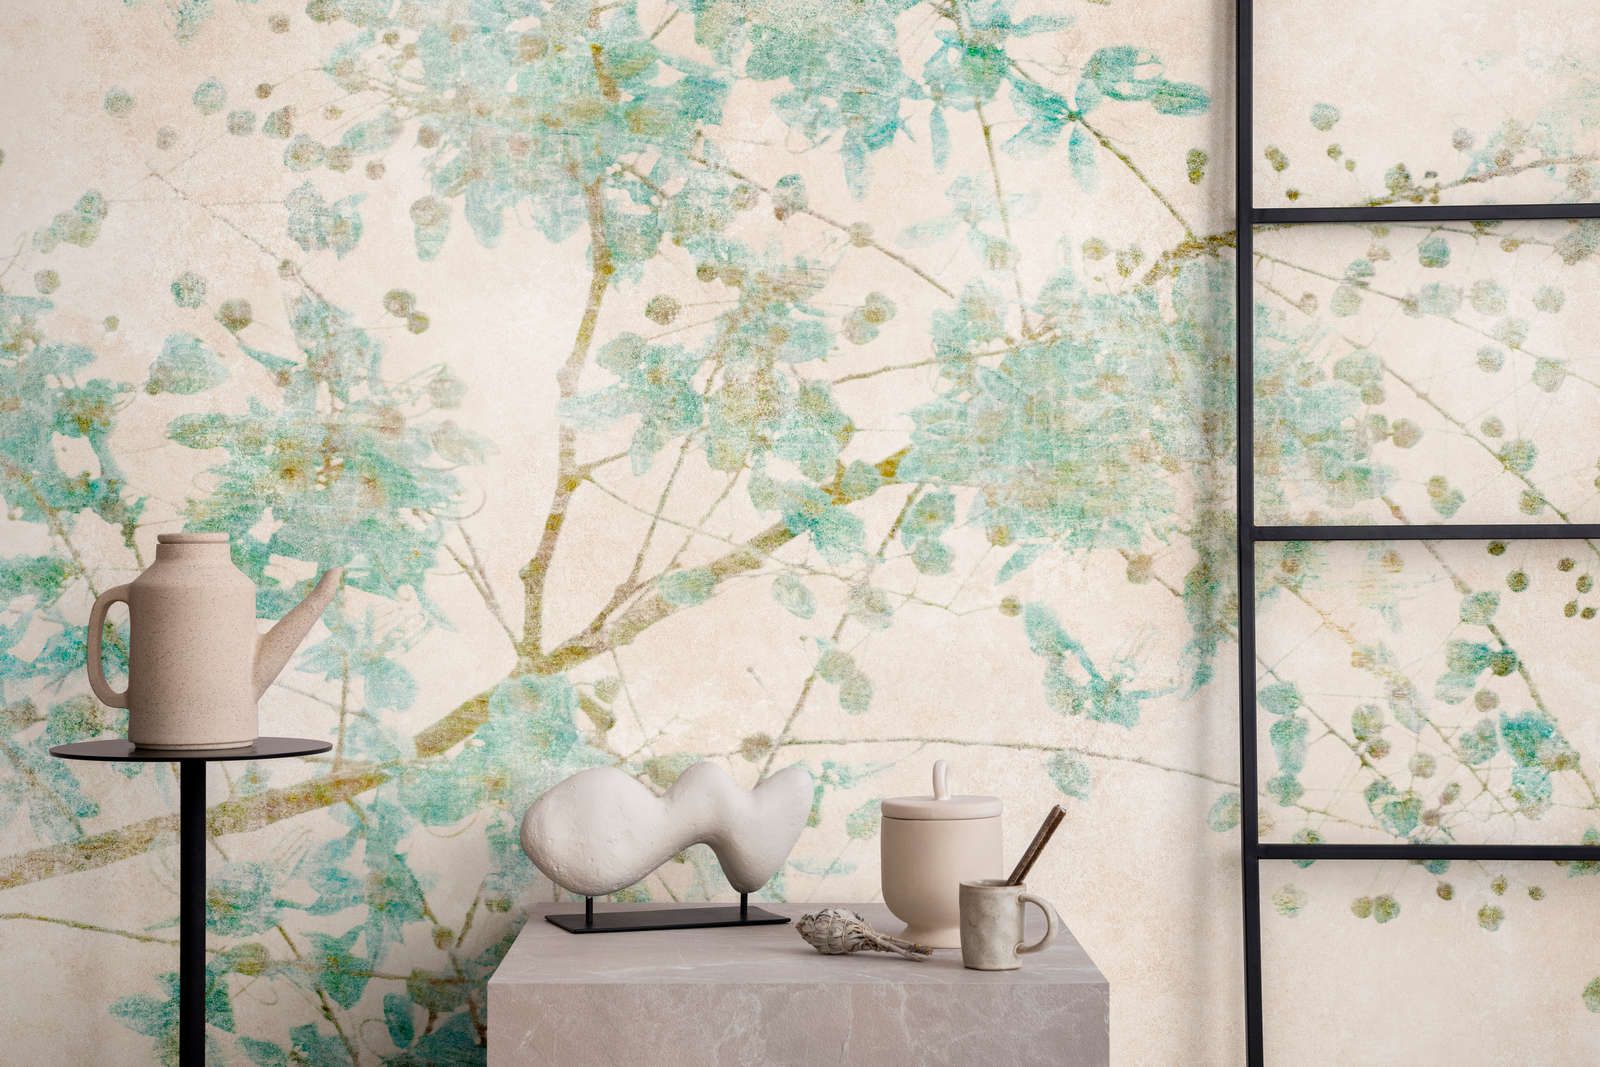             Photo wallpaper »nikko« - Branches in pale colours with vintage plaster texture in the background - matt, smooth non-woven fabric
        